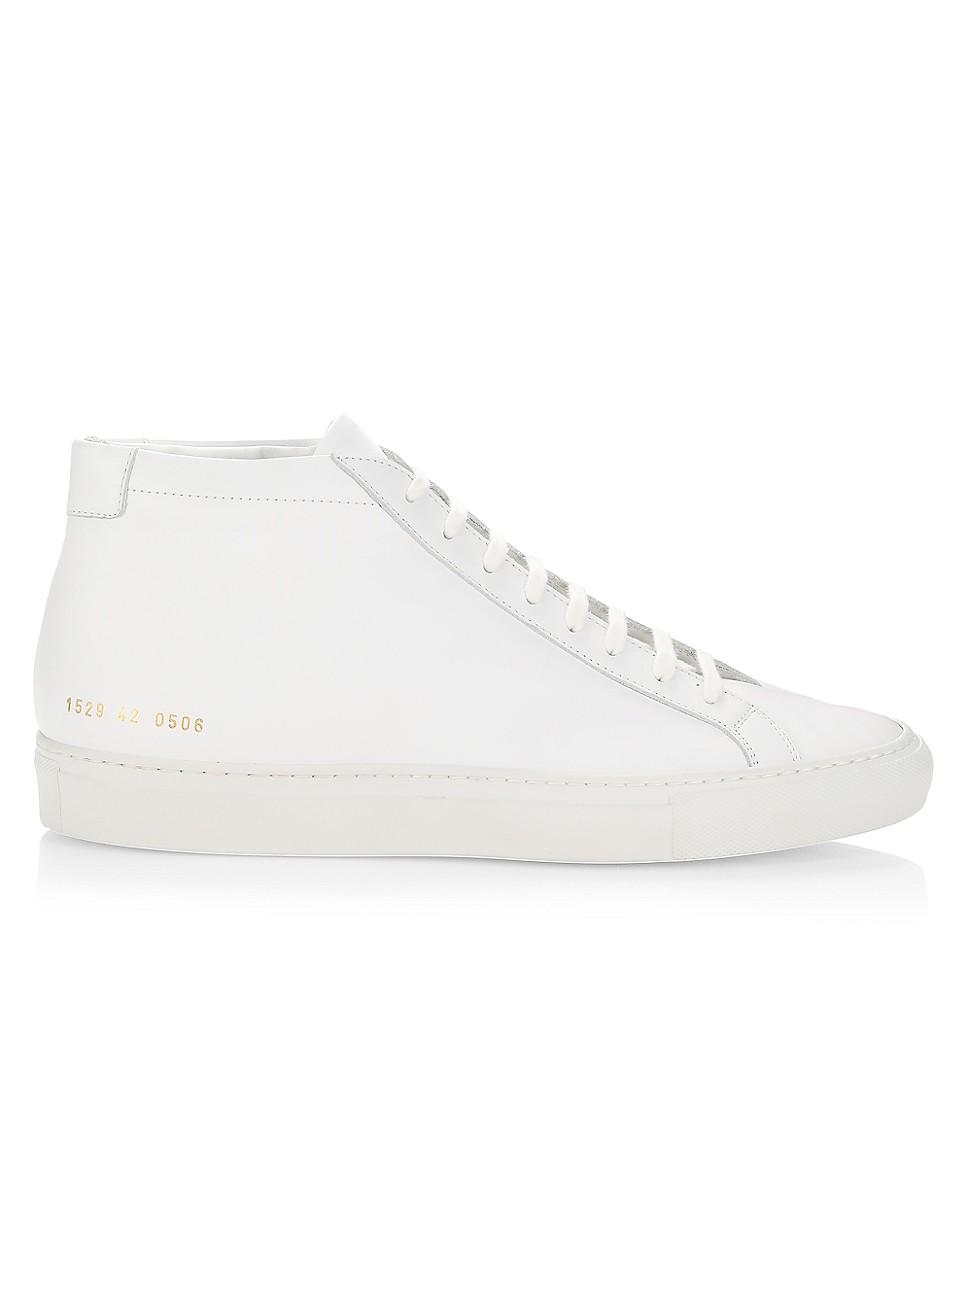 Common Projects Original Achilles Leather High-top Sneakers in White for  Men - Save 59% - Lyst